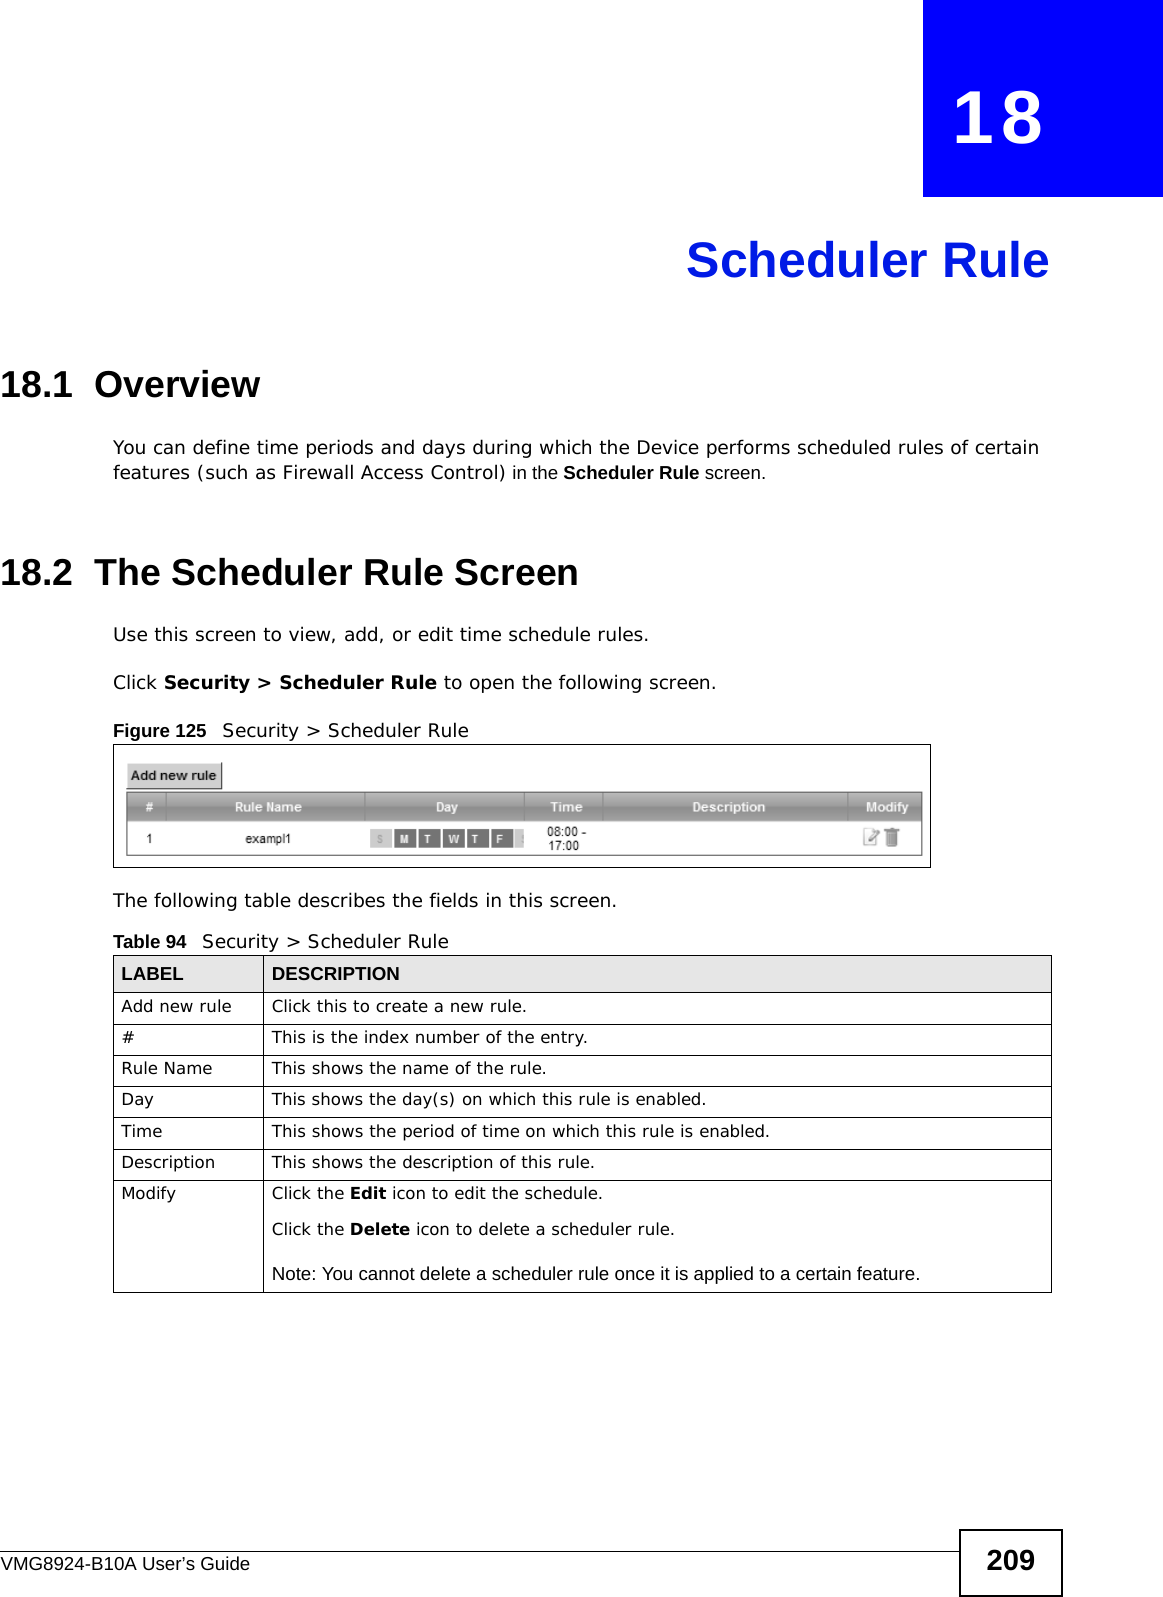 VMG8924-B10A User’s Guide 209CHAPTER   18Scheduler Rule18.1  OverviewYou can define time periods and days during which the Device performs scheduled rules of certain features (such as Firewall Access Control) in the Scheduler Rule screen. 18.2  The Scheduler Rule ScreenUse this screen to view, add, or edit time schedule rules.Click Security &gt; Scheduler Rule to open the following screen. Figure 125   Security &gt; Scheduler Rule The following table describes the fields in this screen. Table 94   Security &gt; Scheduler RuleLABEL DESCRIPTIONAdd new rule Click this to create a new rule.#This is the index number of the entry.Rule Name This shows the name of the rule.Day This shows the day(s) on which this rule is enabled.Time This shows the period of time on which this rule is enabled.Description This shows the description of this rule.Modify Click the Edit icon to edit the schedule.Click the Delete icon to delete a scheduler rule.Note: You cannot delete a scheduler rule once it is applied to a certain feature.